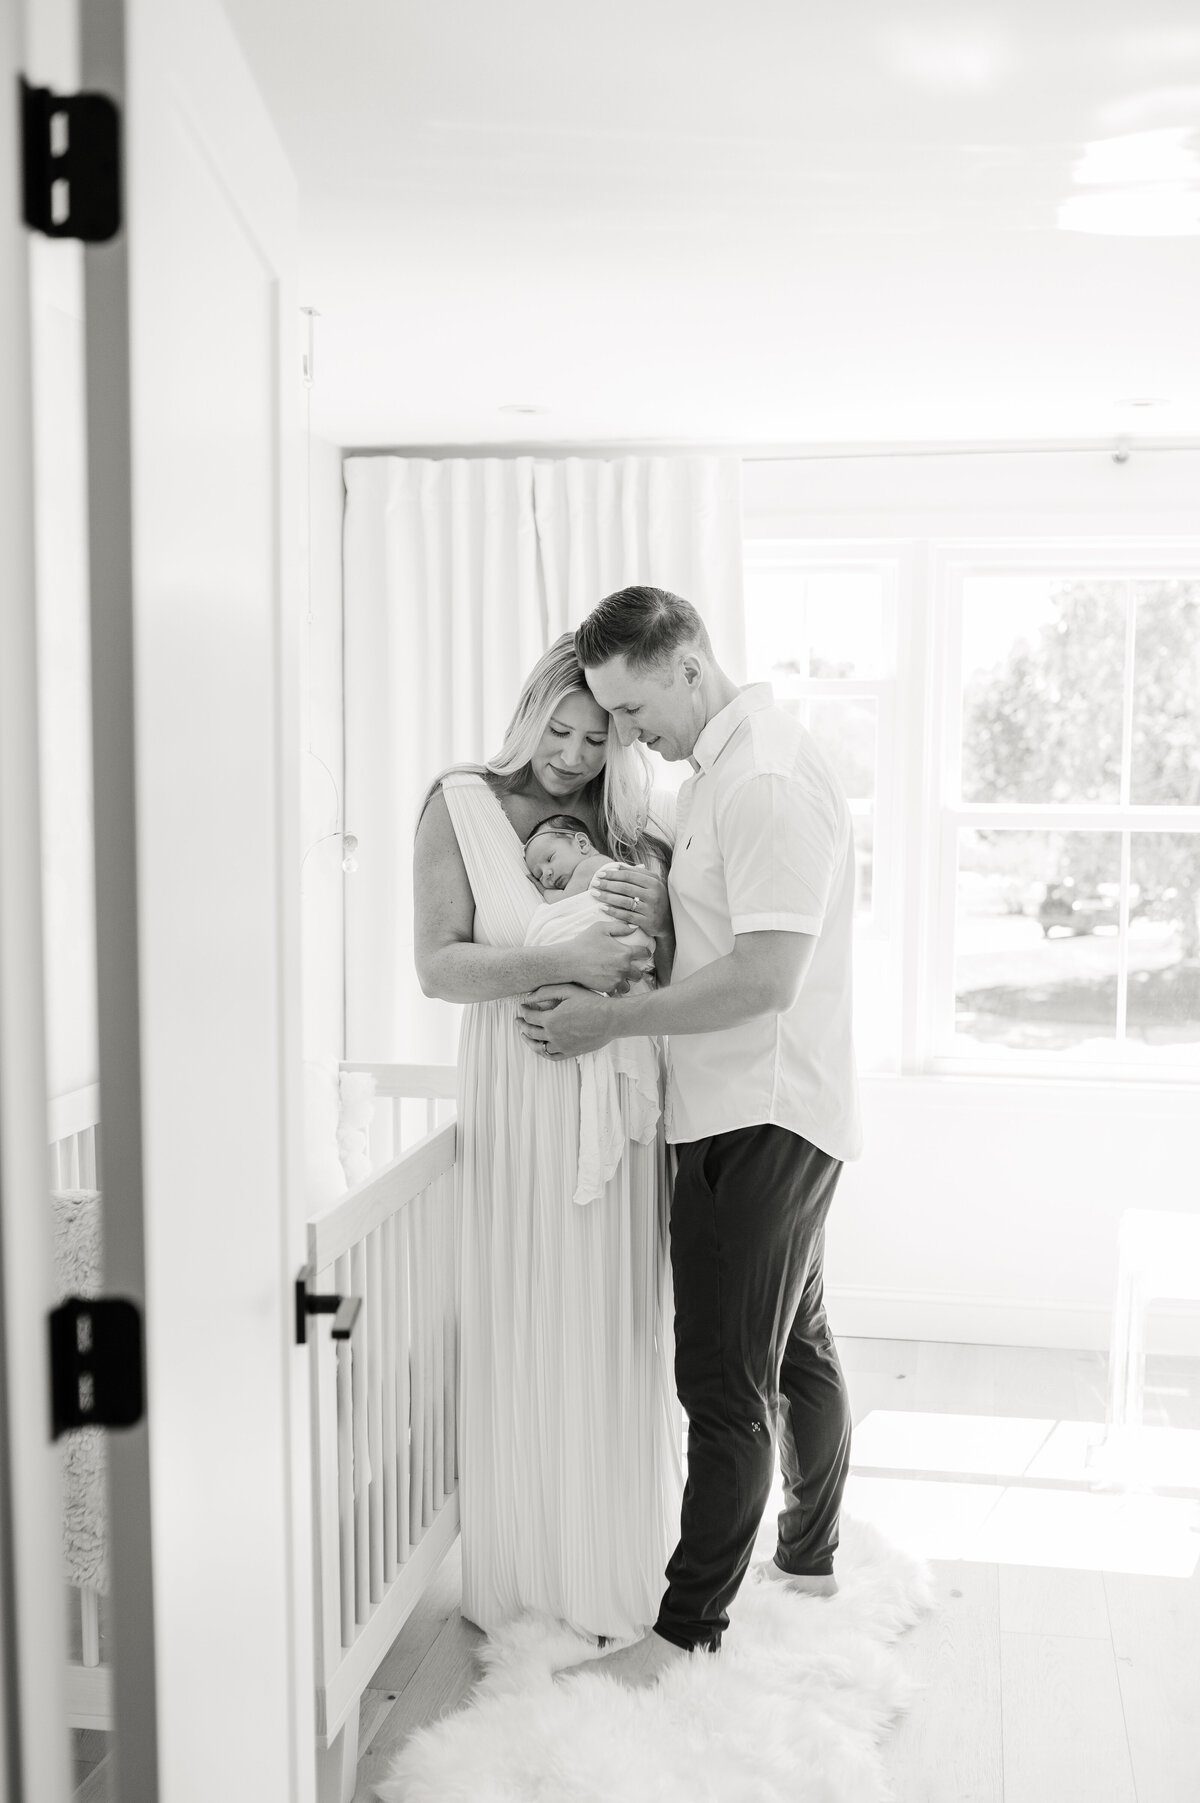 This is a pulled back black and white image of mom and dad standing next to their baby's crib while they are holding their baby and looking down at baby. This image is shot through the doorframe.